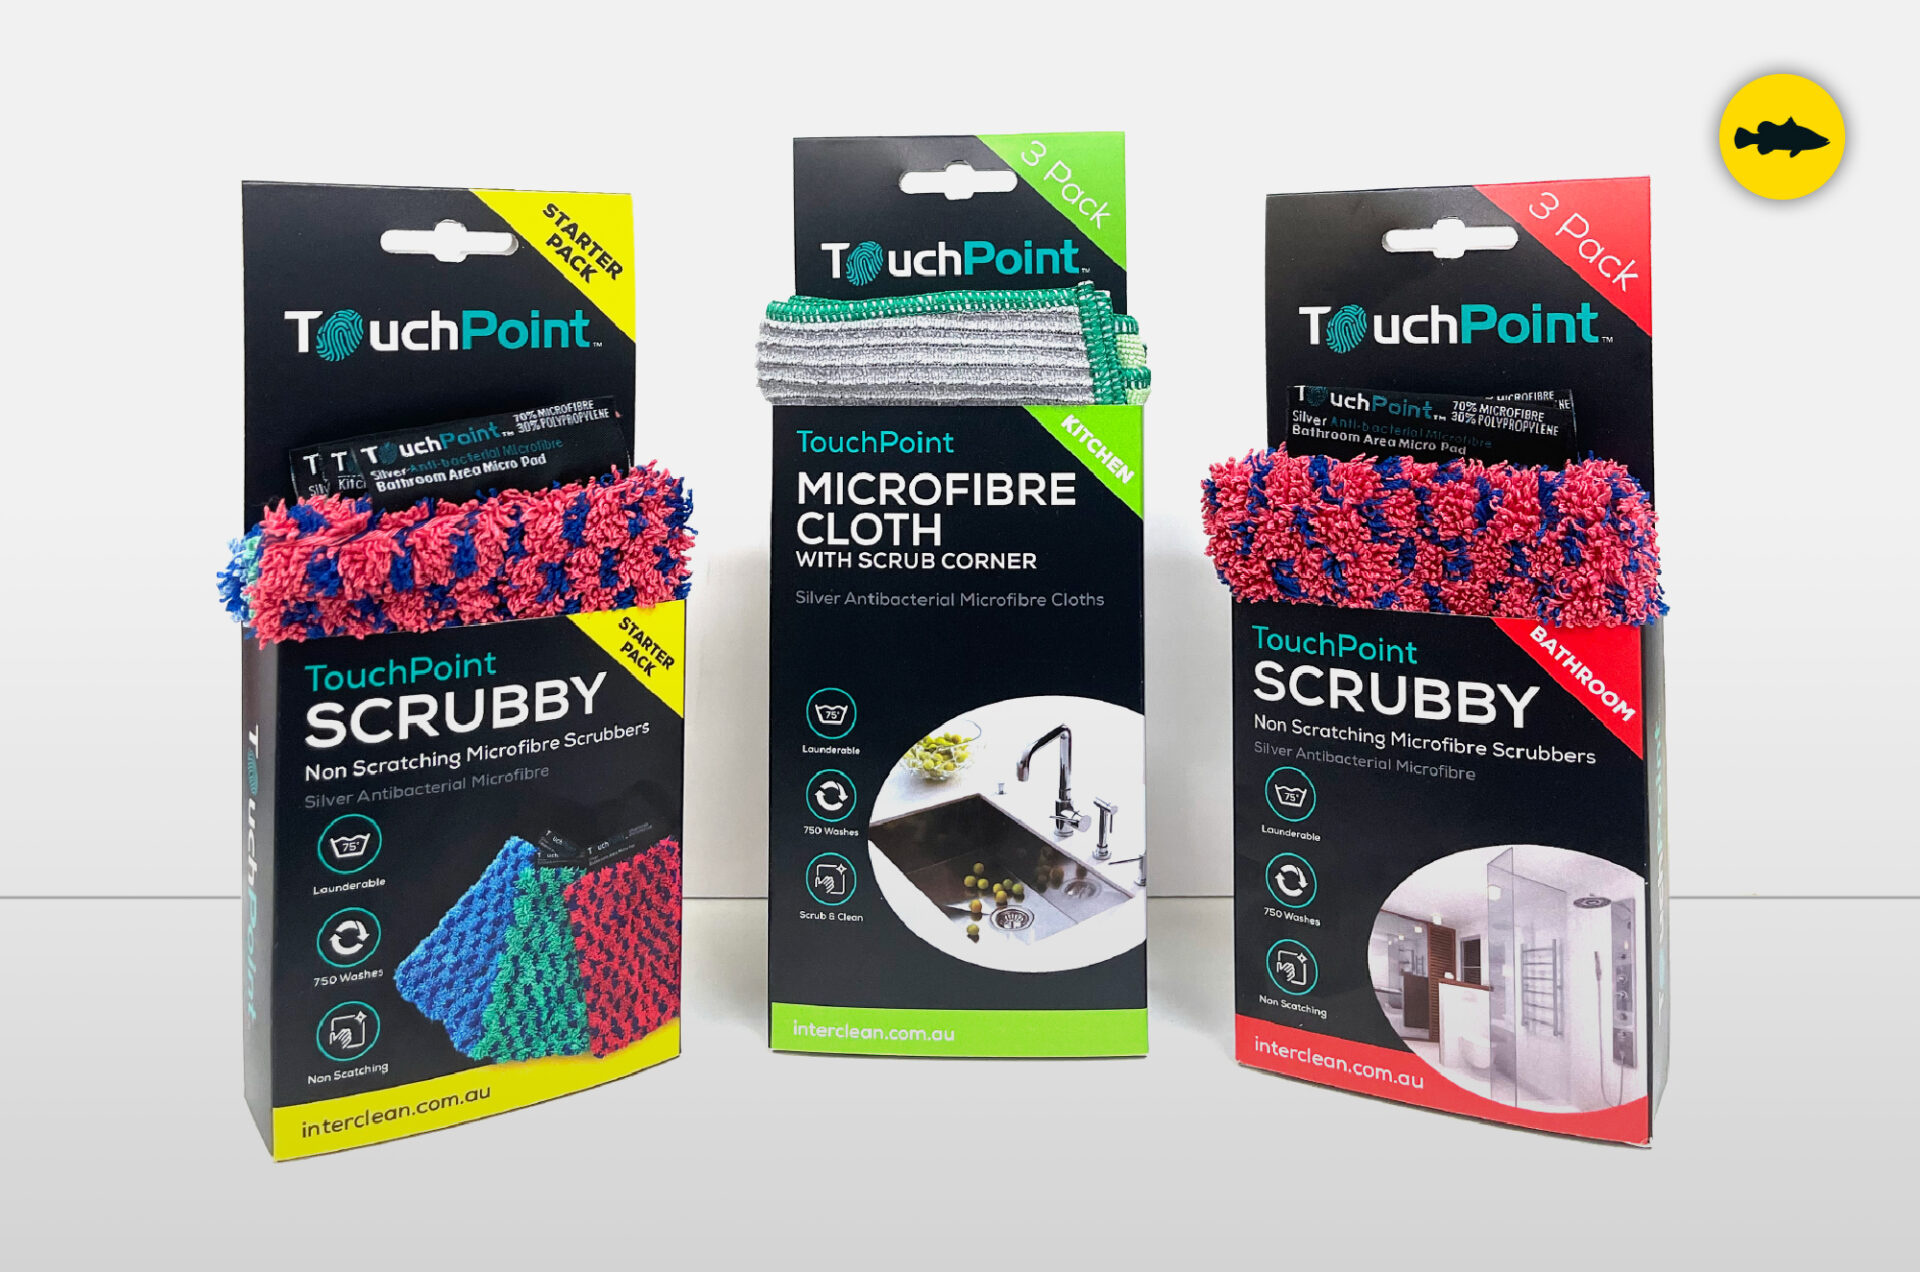 Re-positioning TouchPoint cleaning products